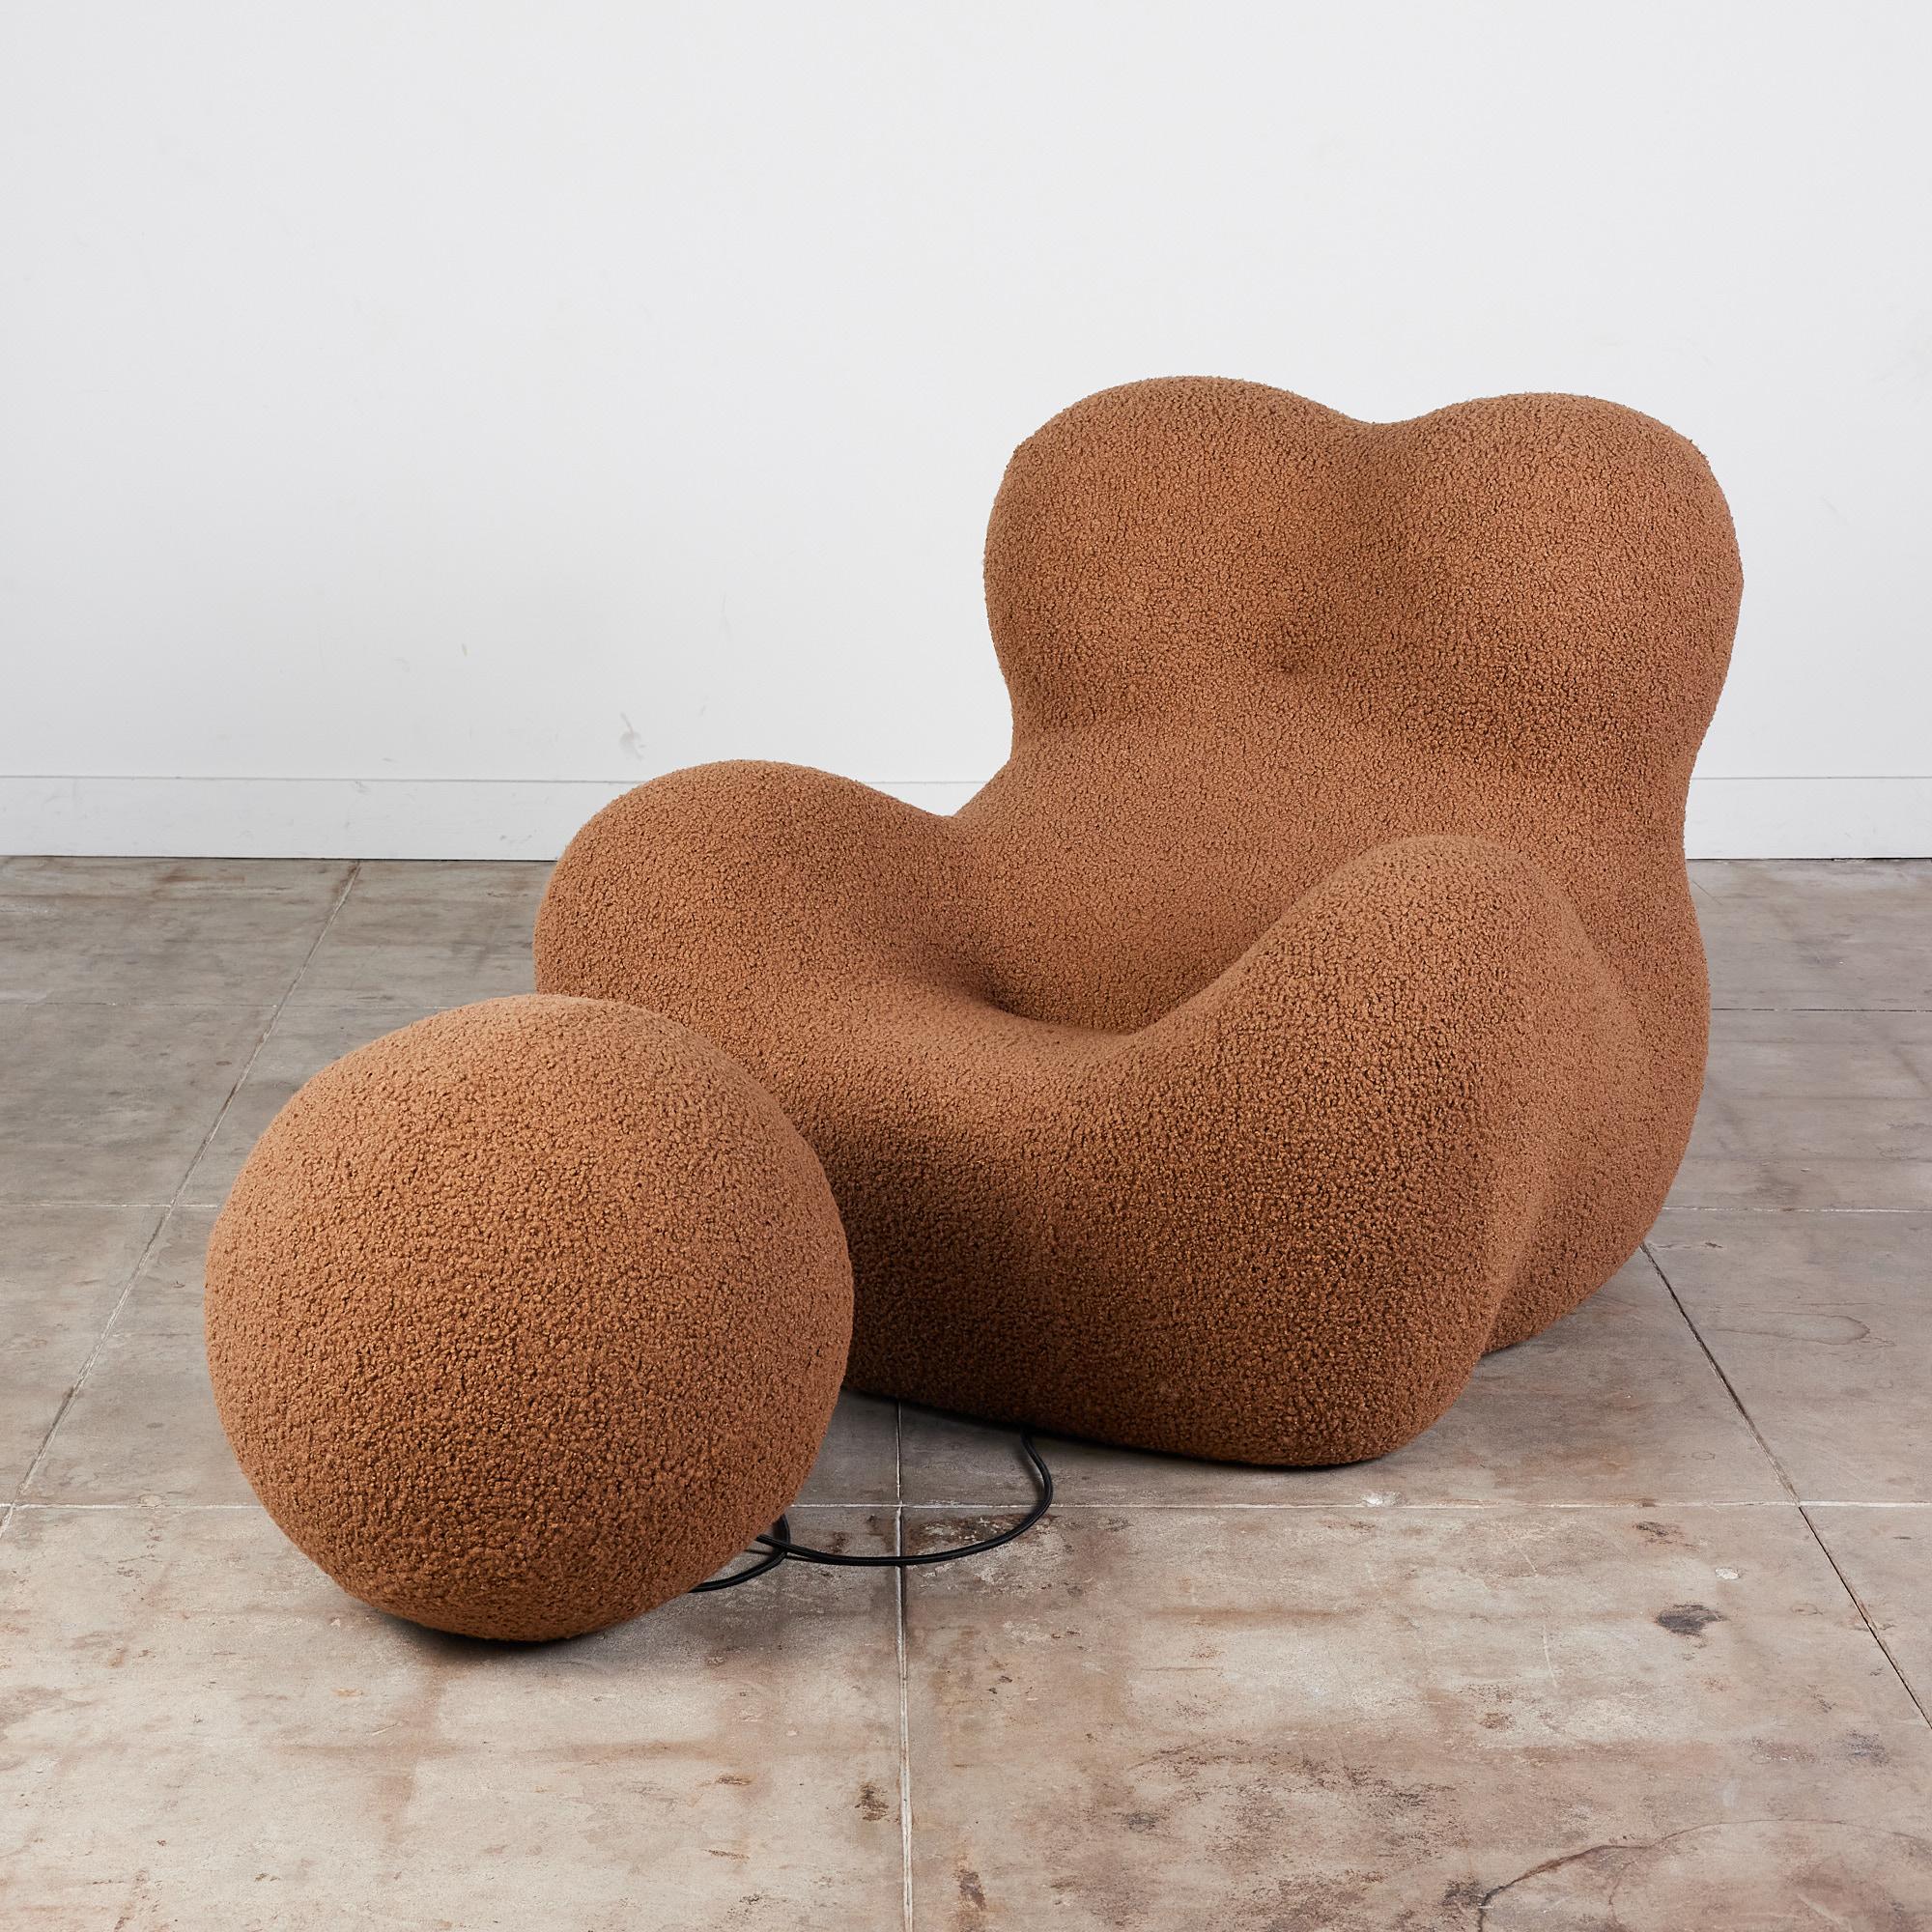 La Mamma Up 5 teddy bear brown bouclé lounge chair by Gaetano Pesce for B&B Italia, c.2000s, Italy. The curvaceous shape, was inspired by the silhouette of ancient fertility goddesses. It's name the 